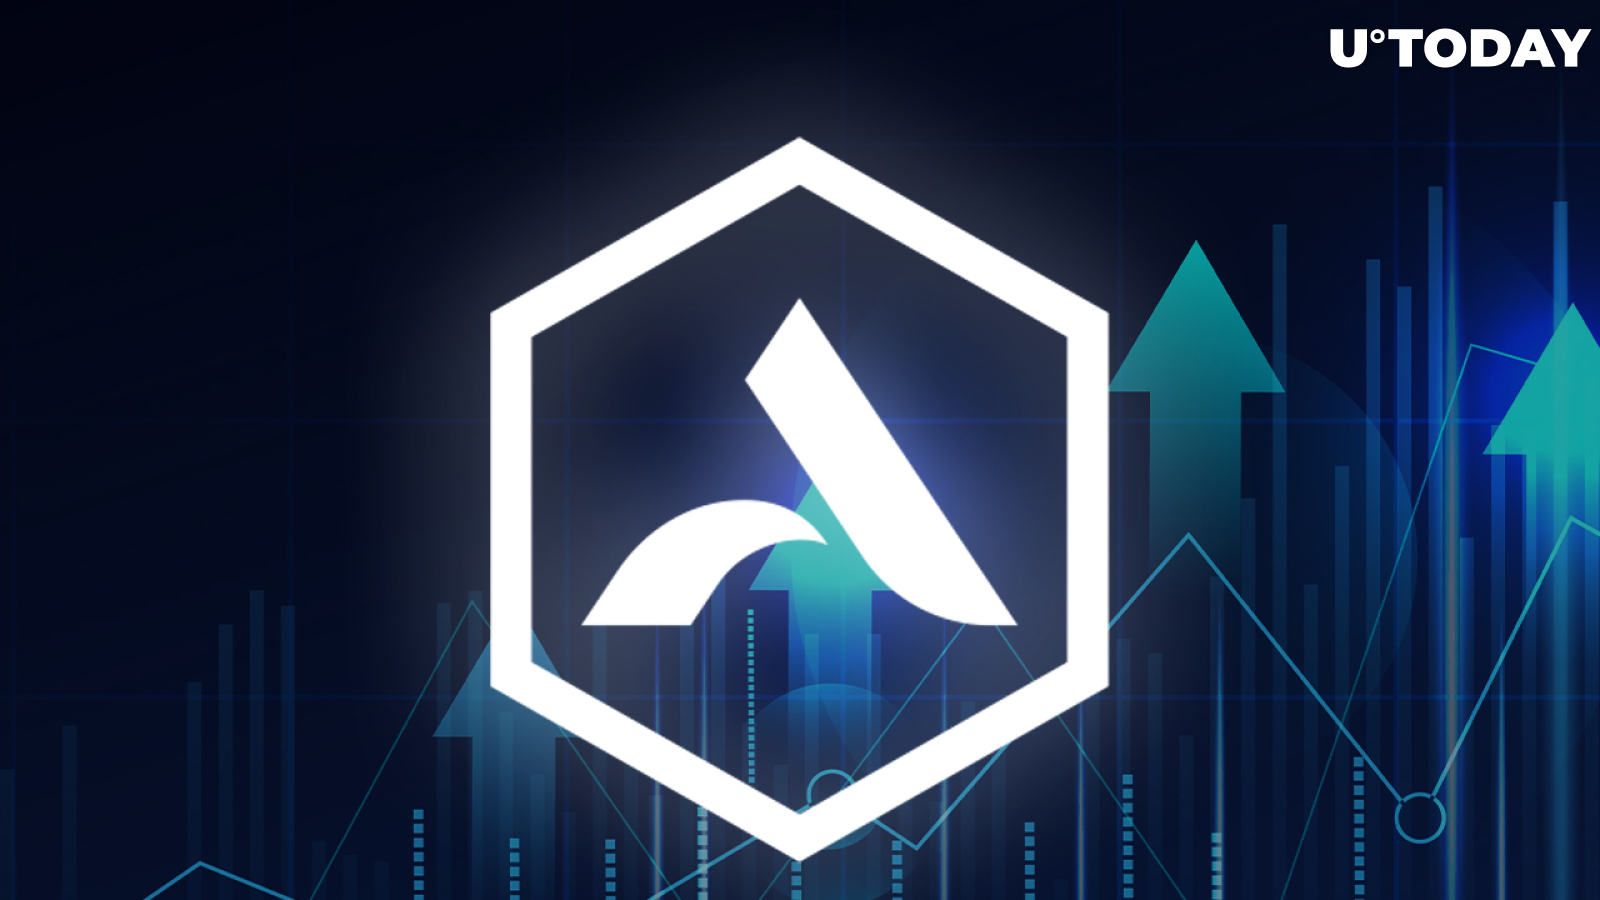 Avalanche Looks to Onboard ApeCoin and Proposes "Otherside" Launch on Its Subnet